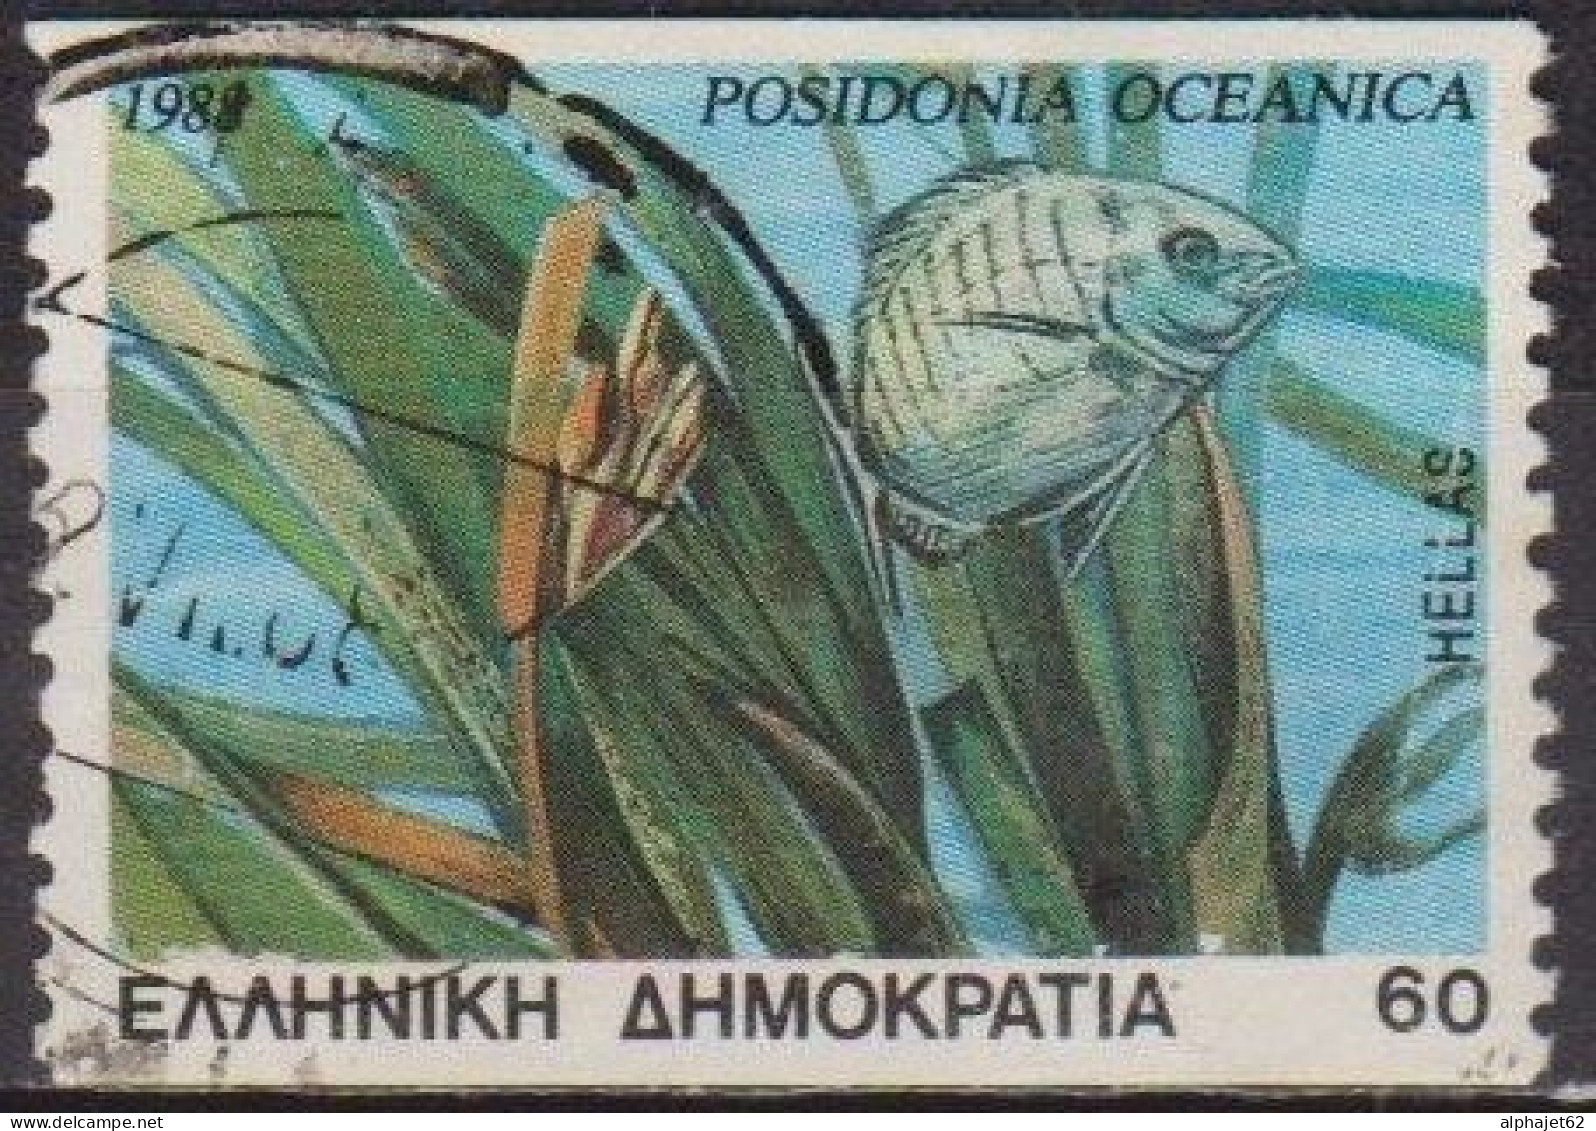 Poisson, Posidonie - GRECE - Faune, Flore - N° 1663 - 1988 - Used Stamps